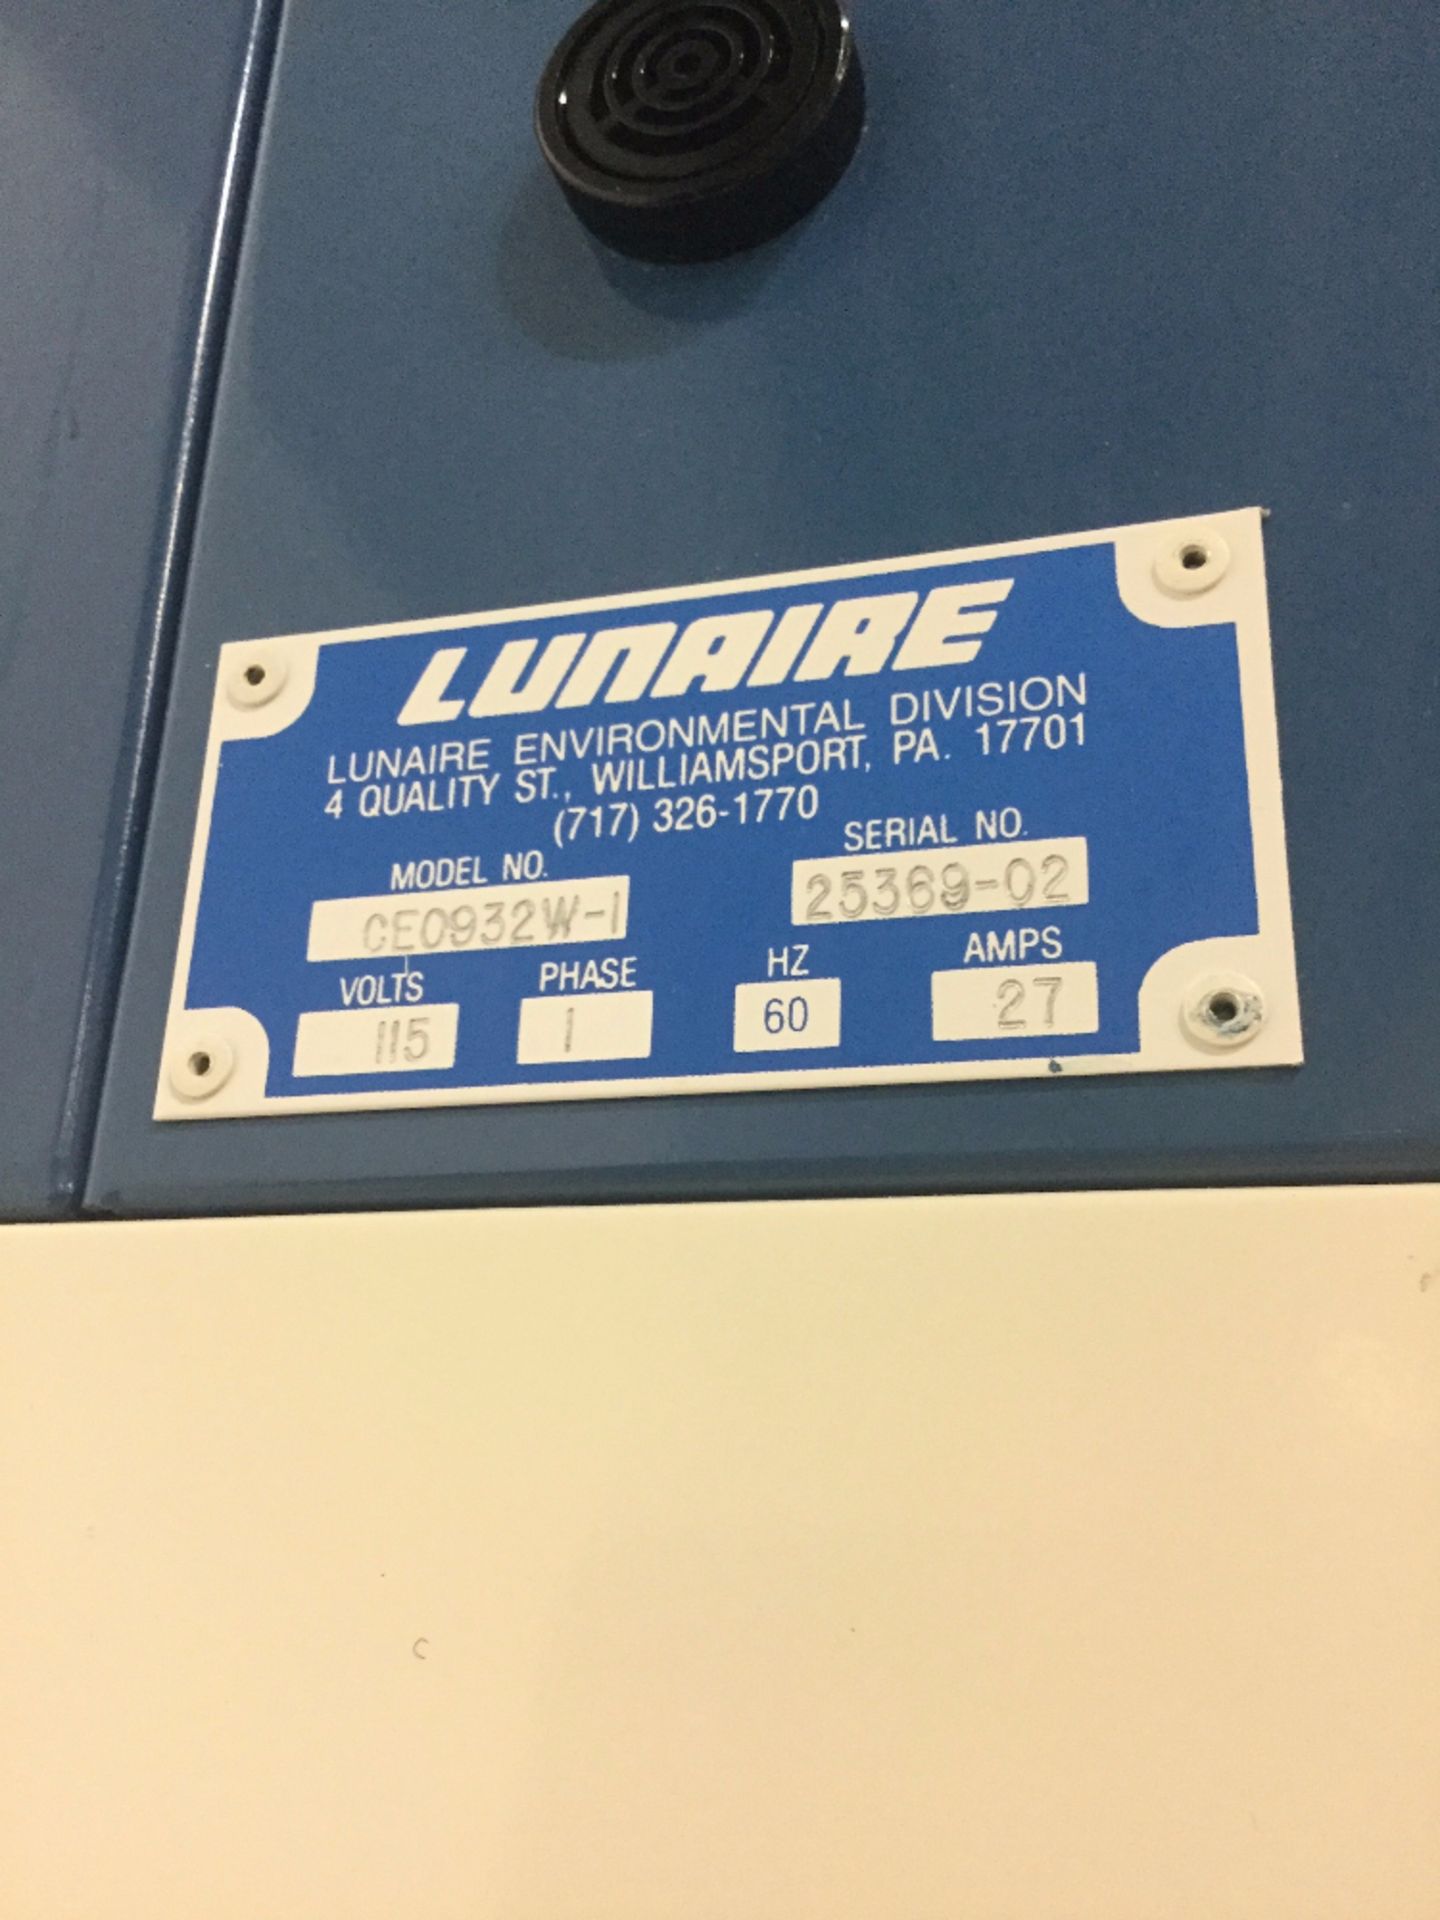 Lunaire CE0932W-1 Environmental Chamber - Image 2 of 4